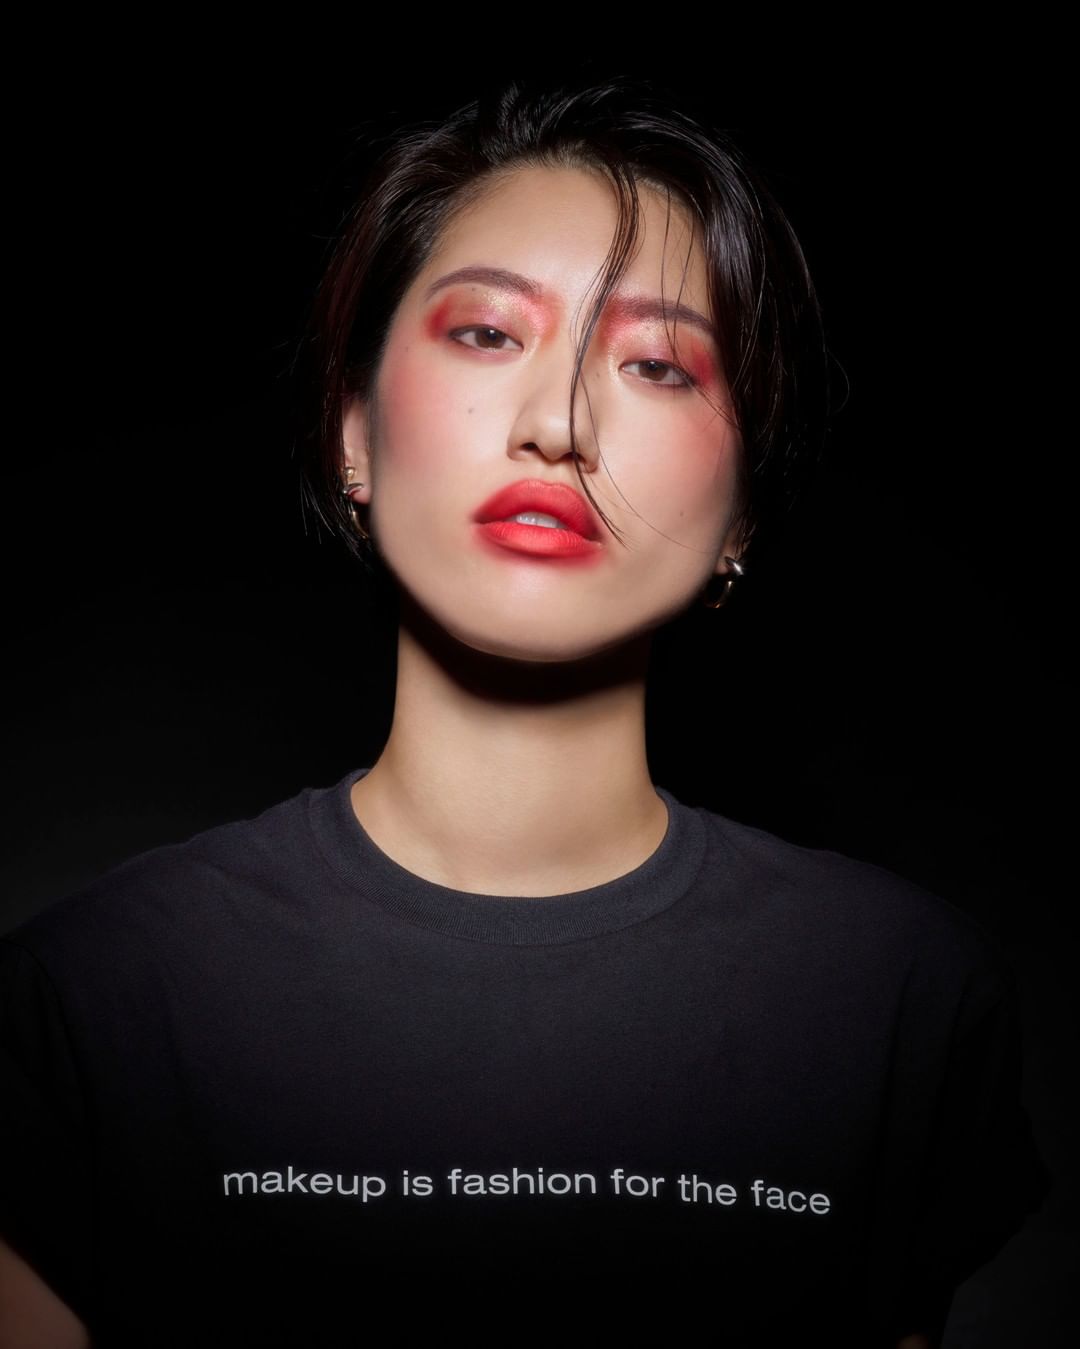 shu uemura - "makeup is fashion for the face" -- mr. shu uemura.⁠
⁠
with a new day comes new strength and new thoughts, so let makeup dress your day. 💄⁠
⁠
@⁠uniqlo.ut⁠
#shuuemura #UT #shuartistry #shu...